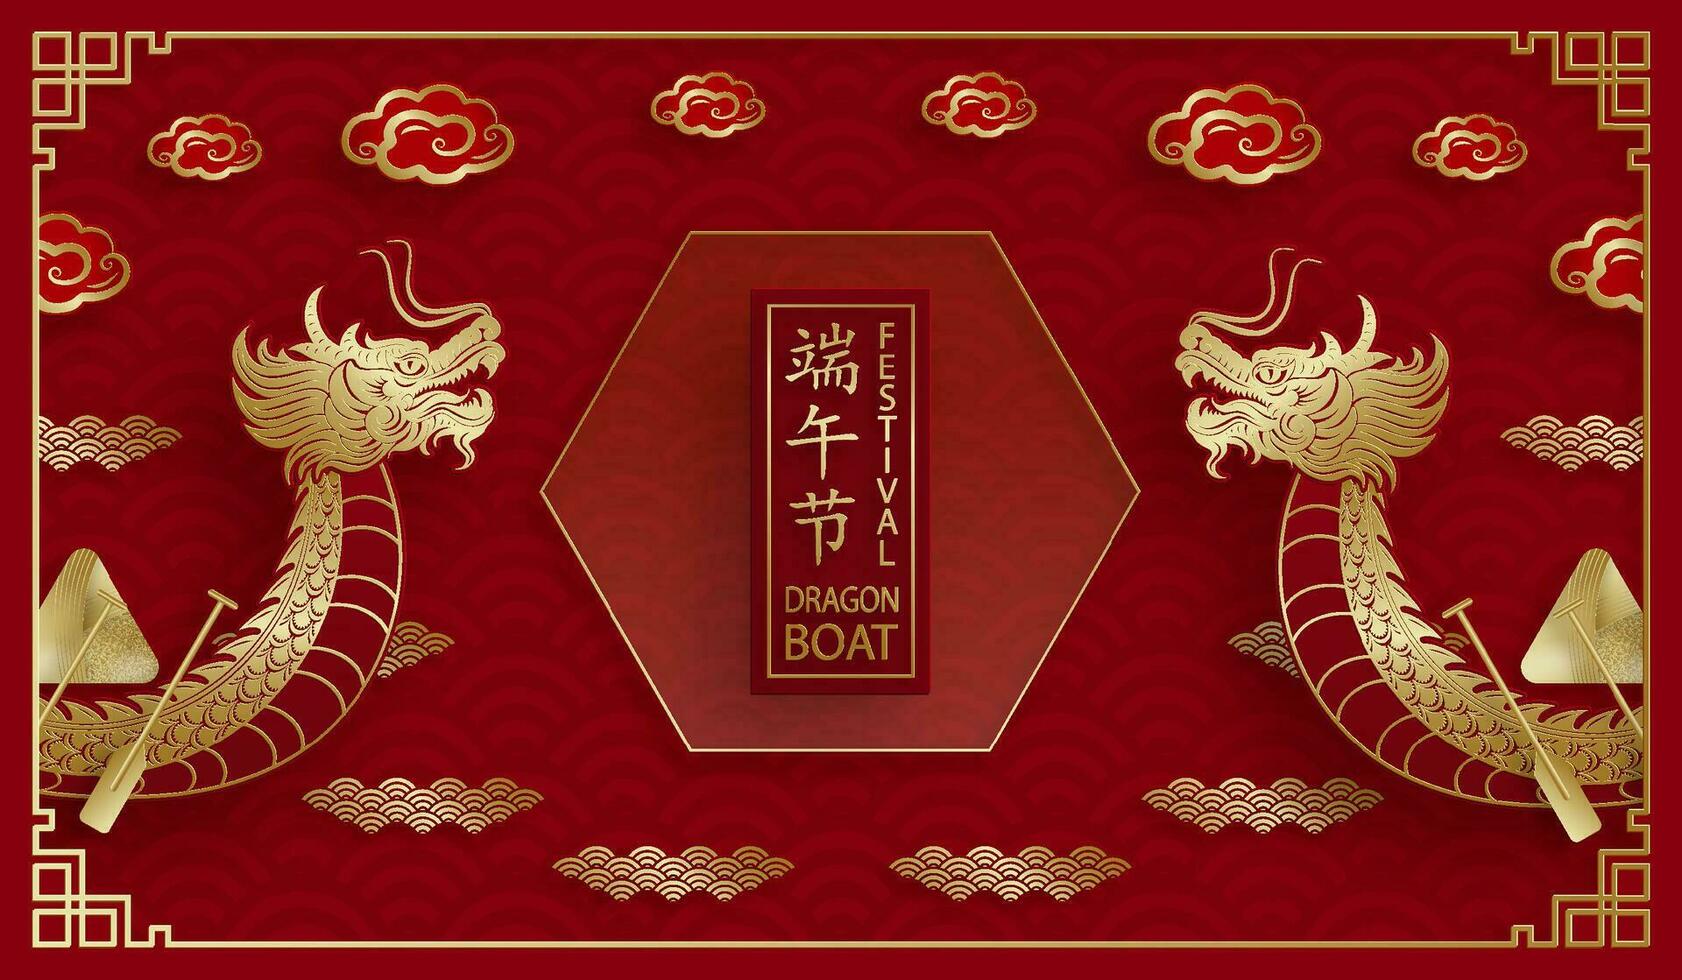 Dragon boat festival with Asian elements vector